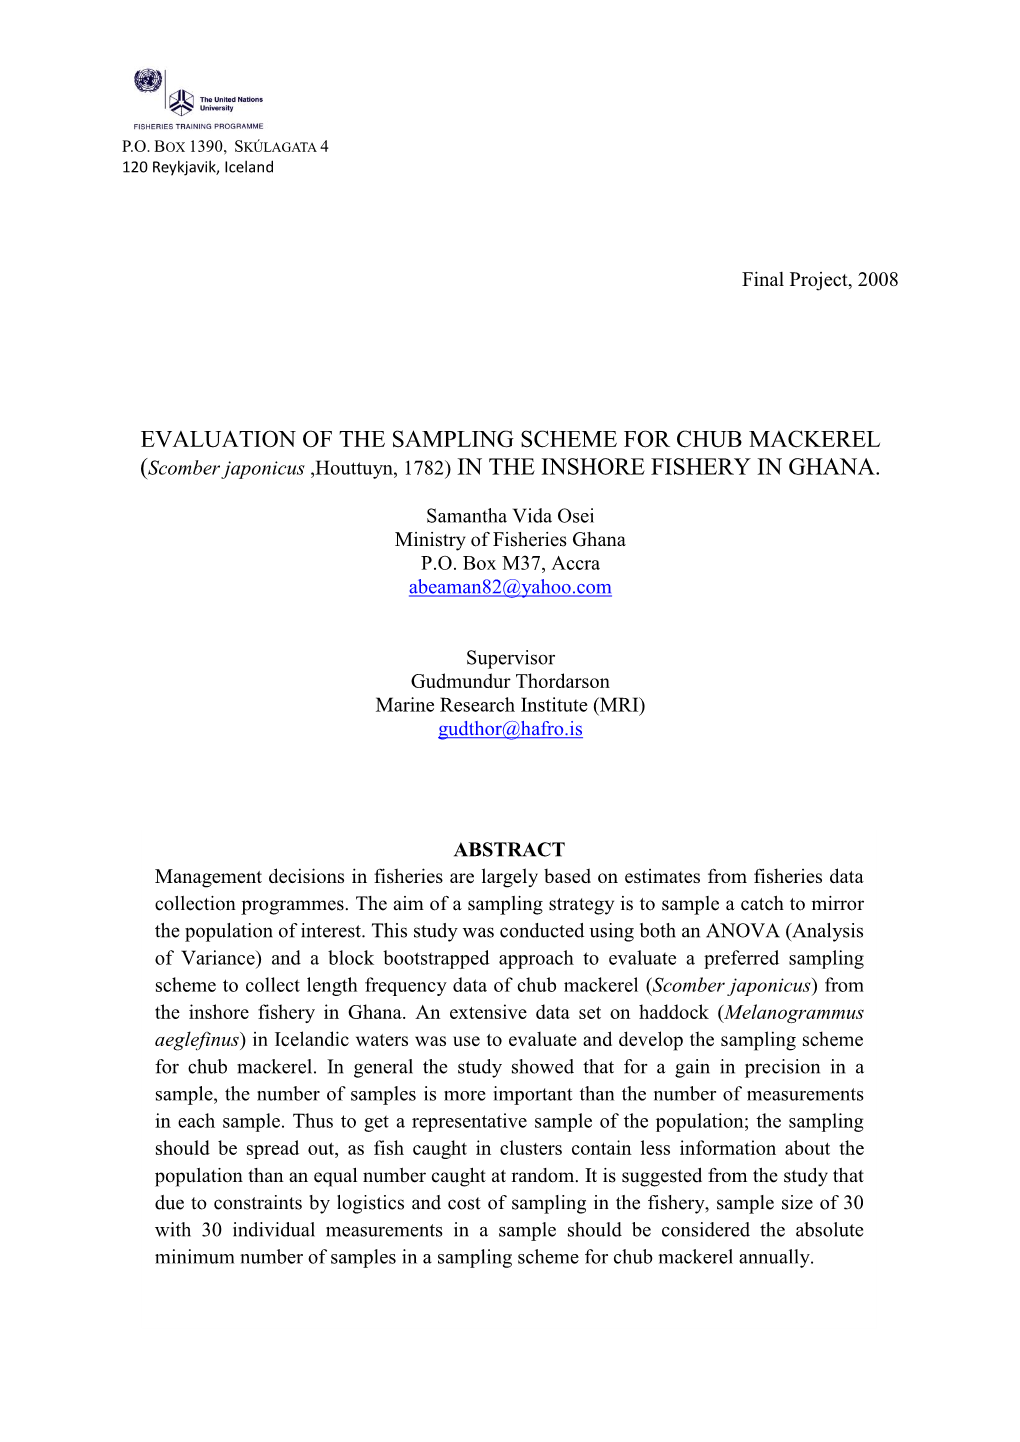 EVALUATION of the SAMPLING SCHEME for CHUB MACKEREL (Scomber Japonicus ,Houttuyn, 1782) in the INSHORE FISHERY in GHANA